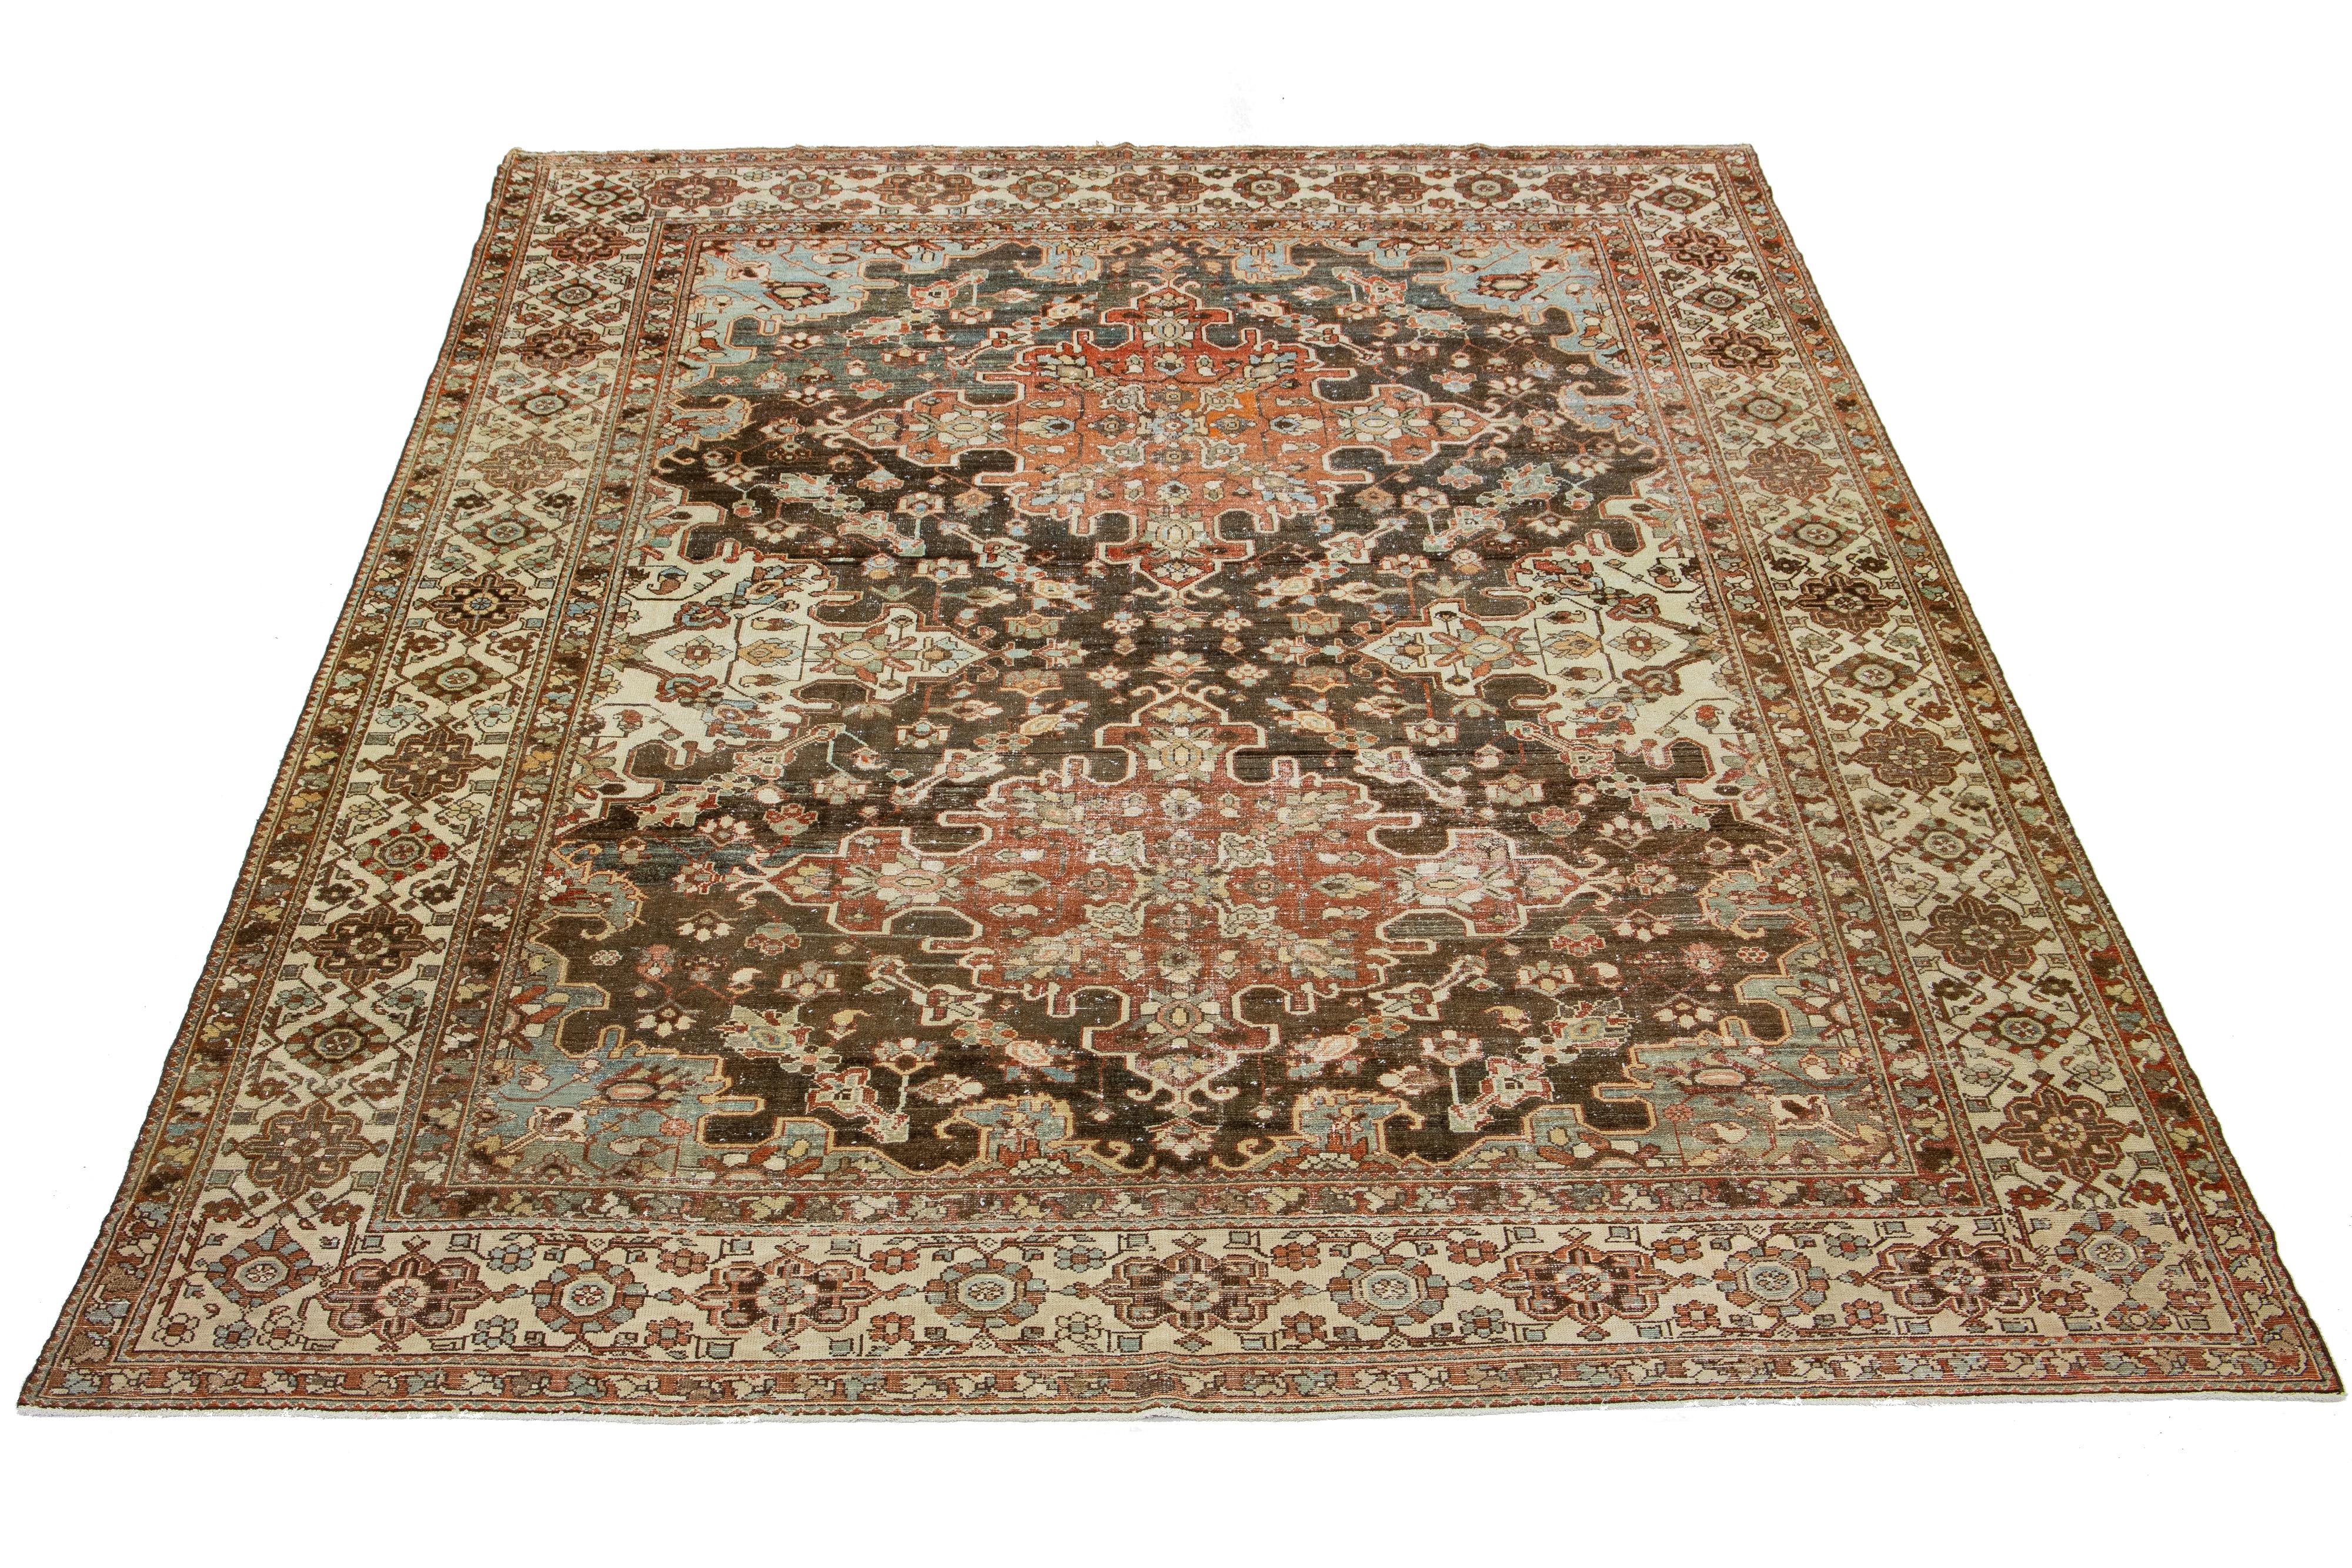 This is a beautiful Antique Bakhtiari hand-knotted wool rug with a brown-colored field. The Persian rug features classic floral patterns with blue, brown, and rust hues.

This rug measures 10'8